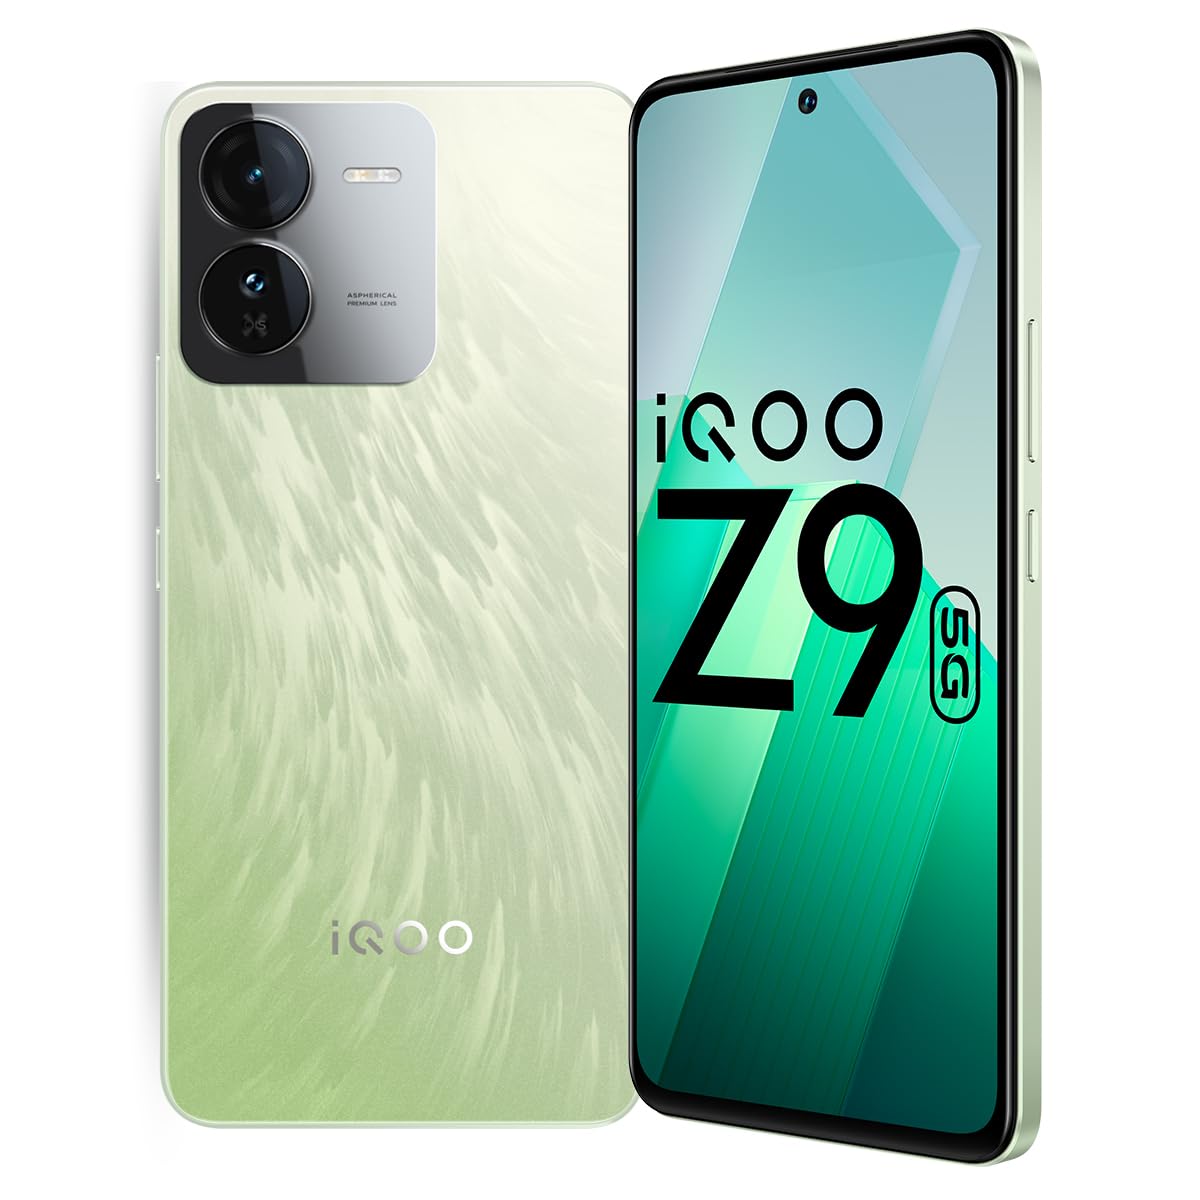 iQOO Z9 Turbo teased to launch this month, will go head to head with the Redmi Turbo 3 - iQOO - News